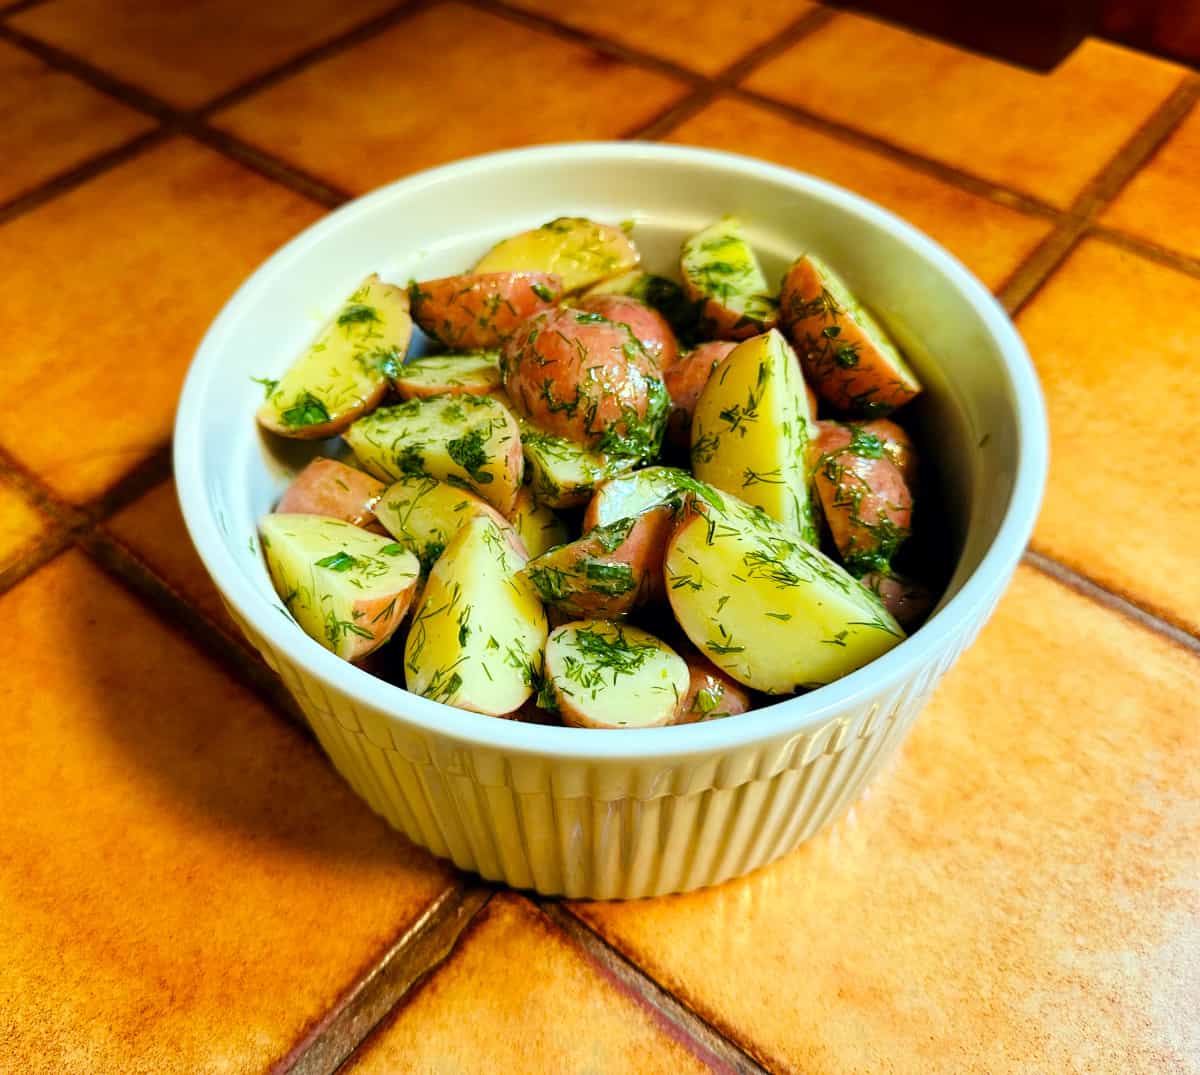 Dill potatoes in a round white ceramic dish with vertical ridges around the sides.